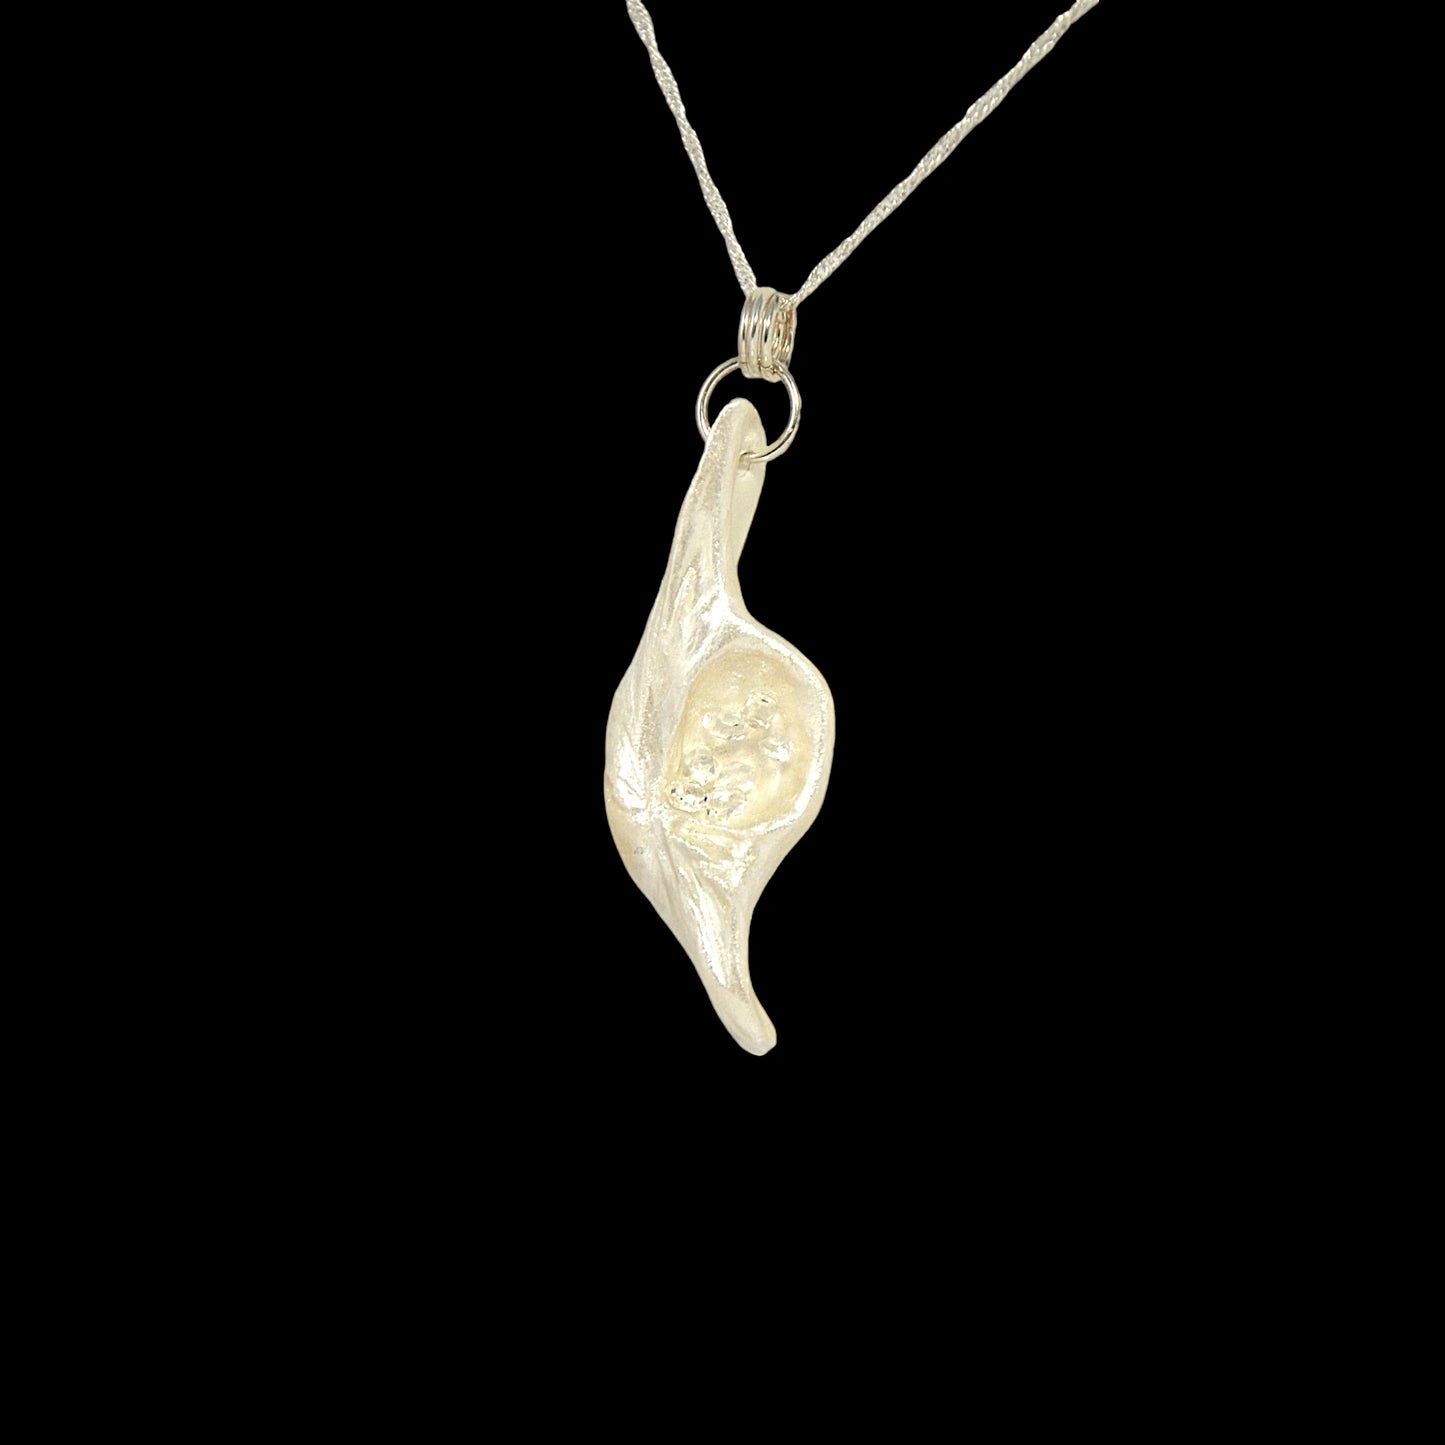 Beautiful pendant called Clarity.  Clarity is a natural seashell from the beach of Vancouver island.with seven herkimer diamonds.  The pendant is turned to the right to show the viewer the shape of the pendant and the herkimer diamonds.